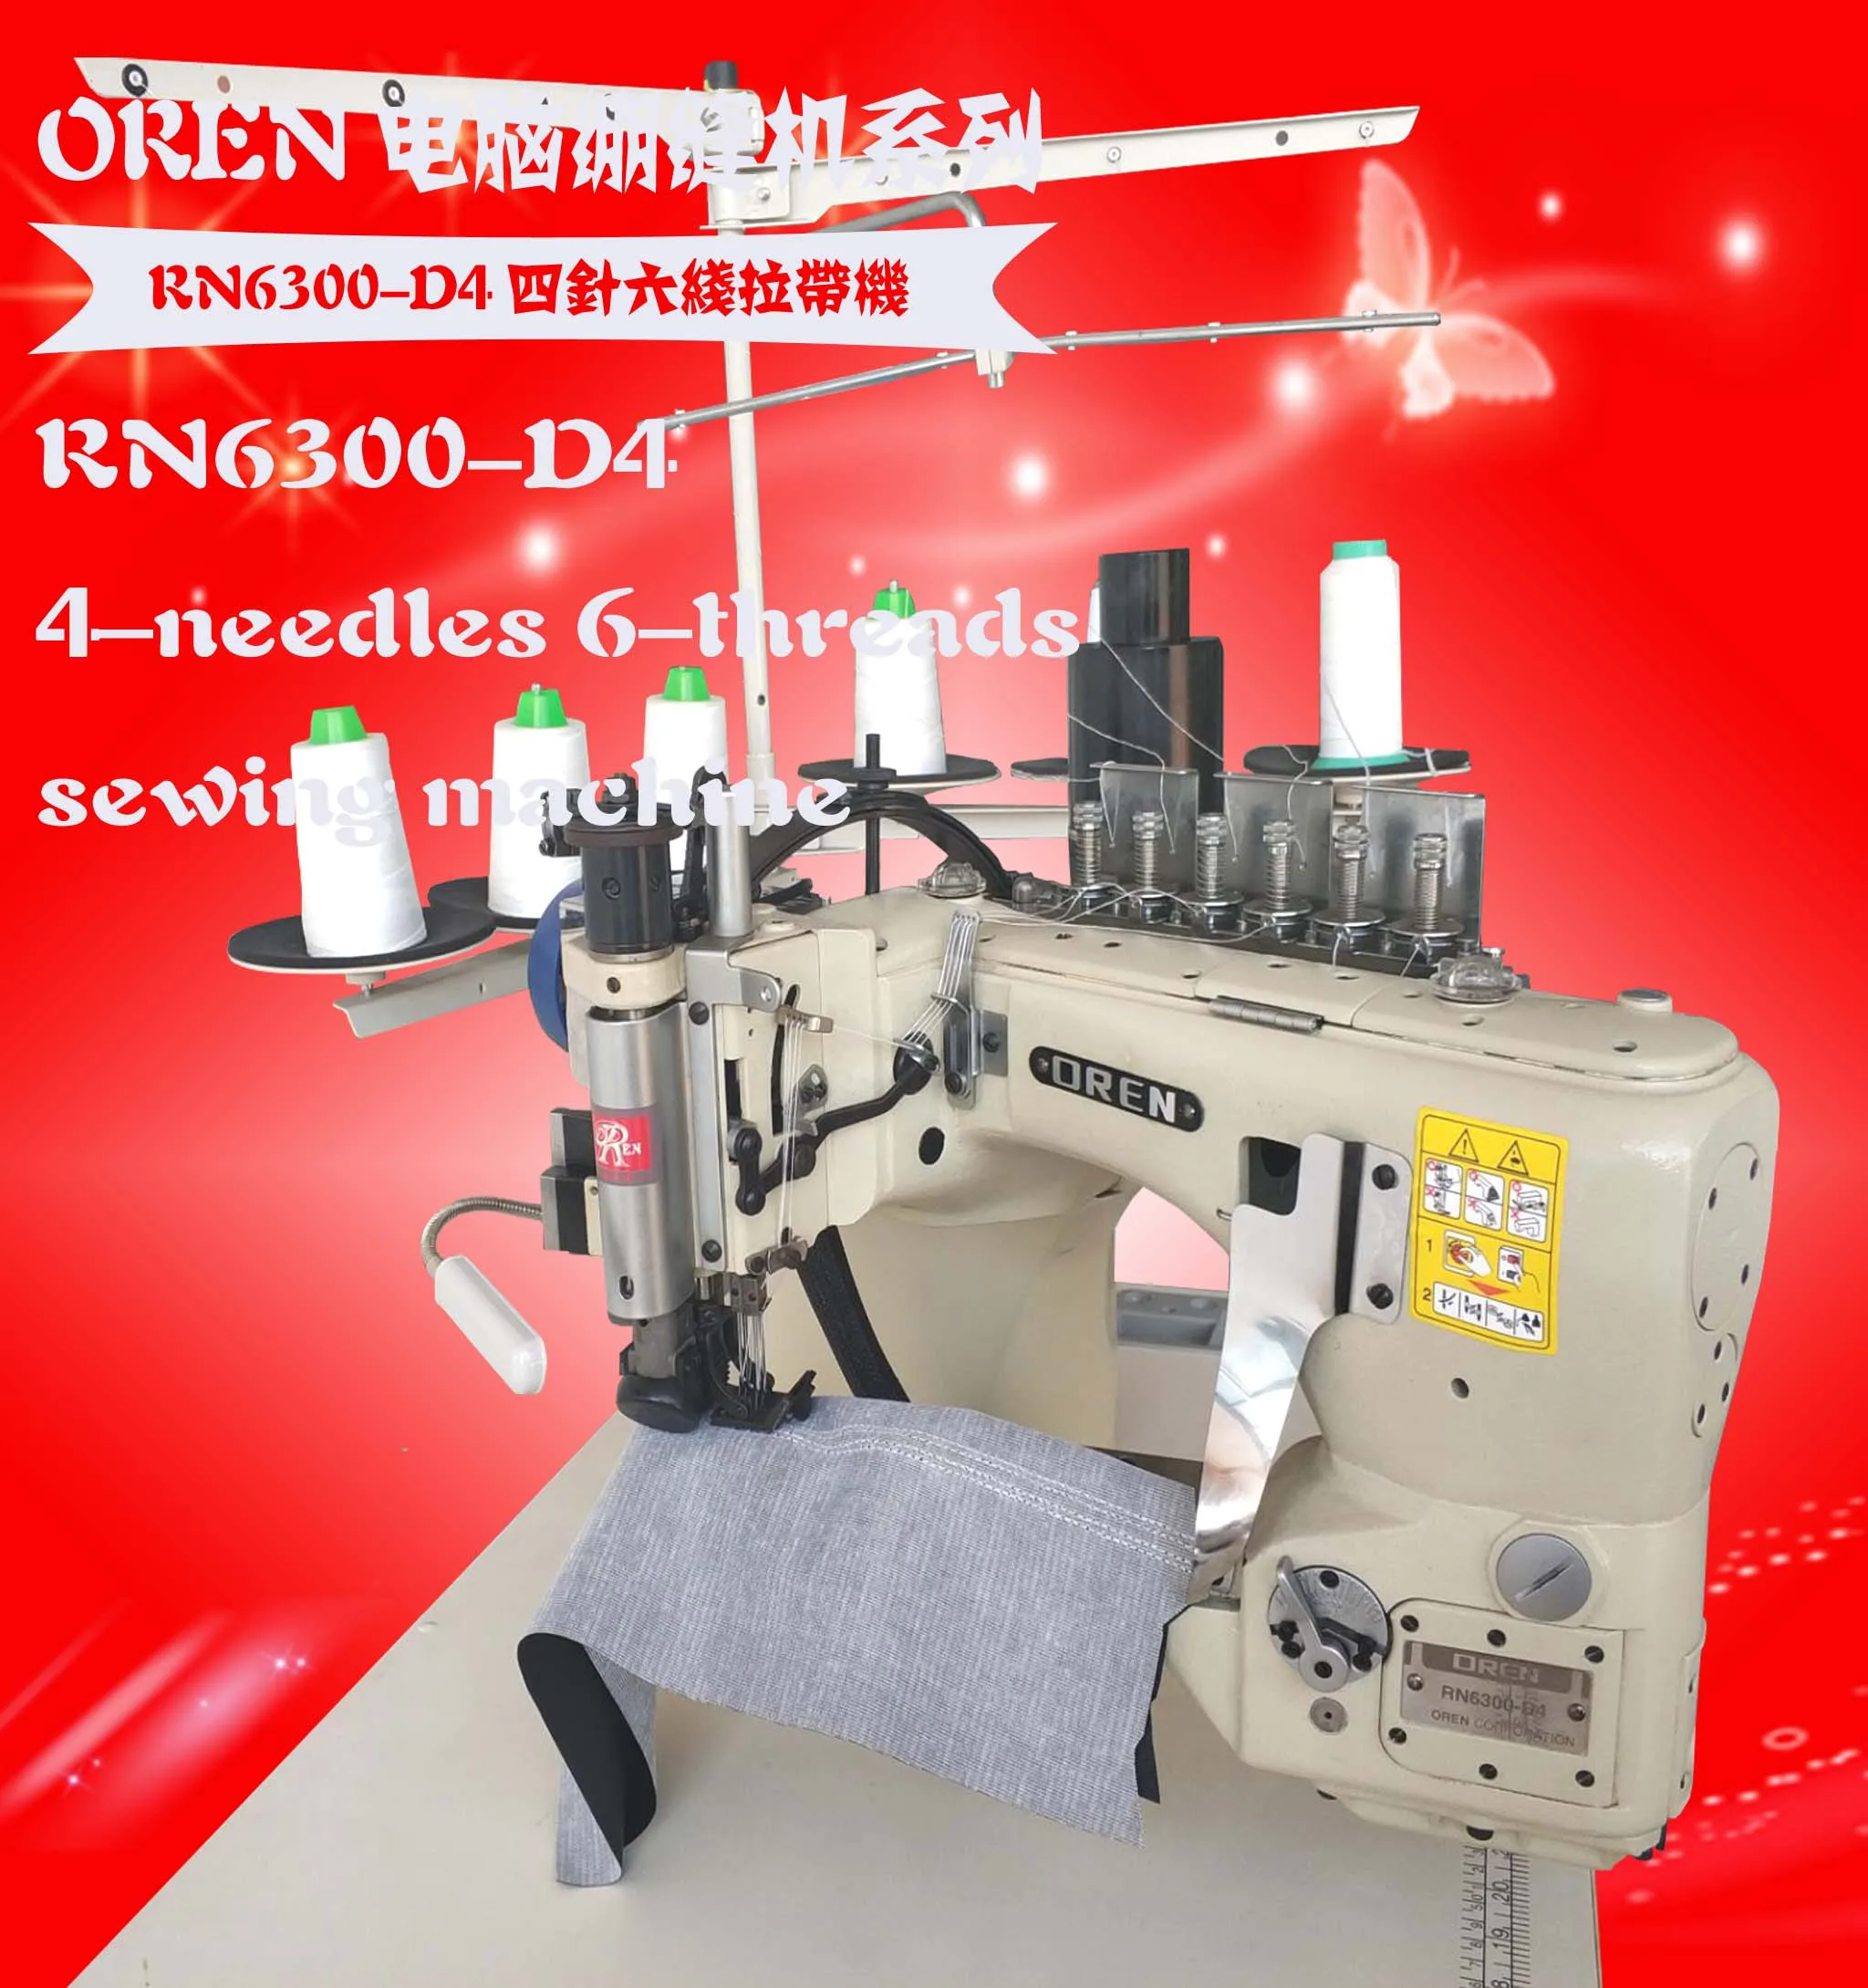 Athlete Leotard Sewing Machine Sports Rn6300-d4 Heal Care Clothing Splicing Sewing  Machine Pulling Machine - Buy Athlete Leotard Sewing Machine,Sports  Healcare Clothes Sewing,High Elastic Effect Unique Tights Product on  